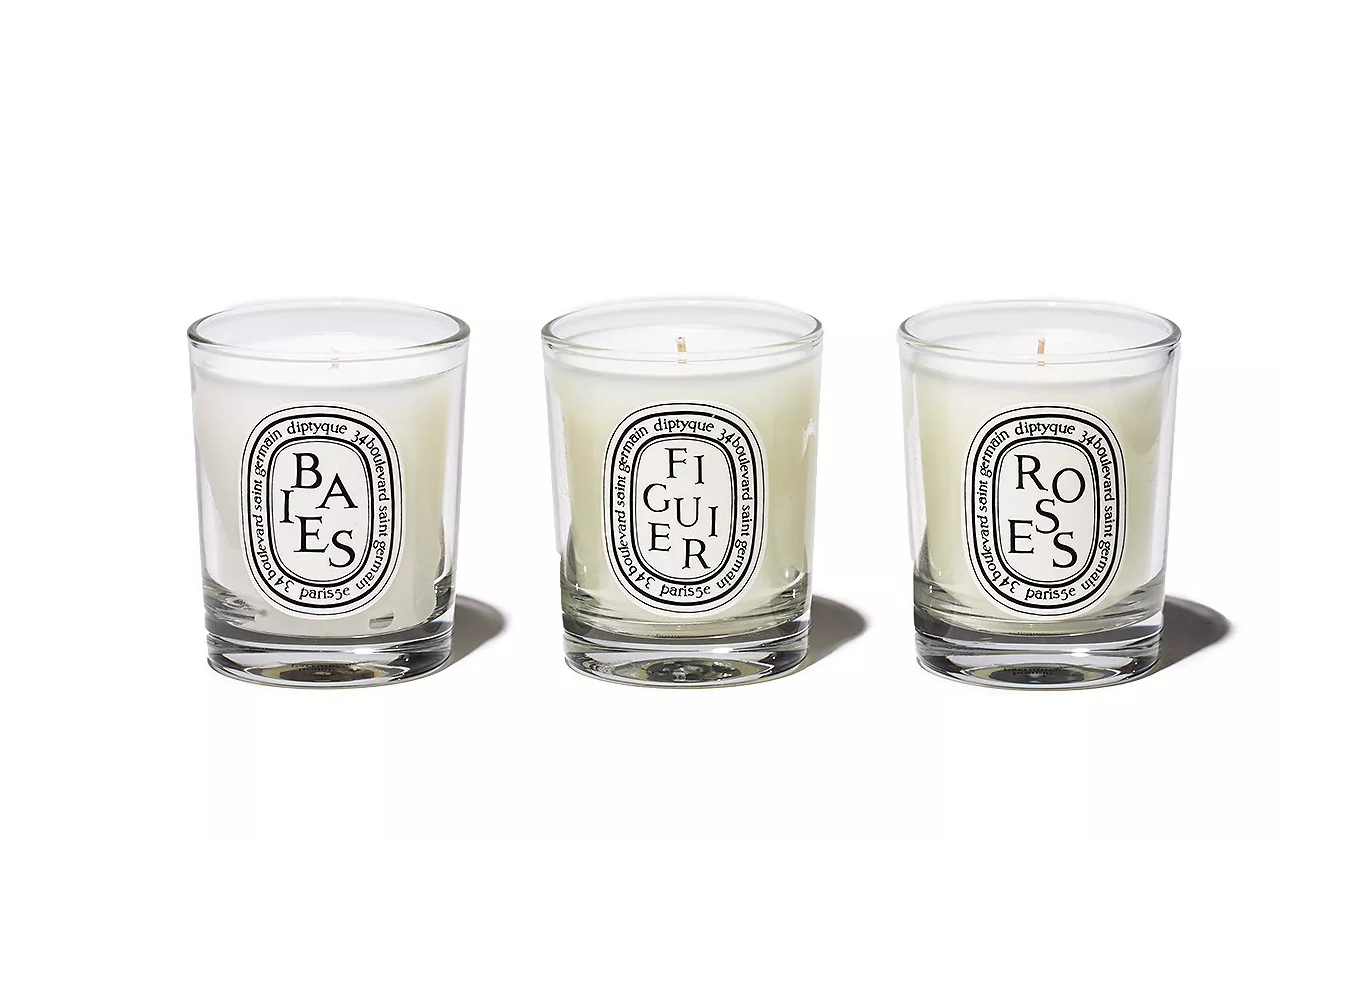 Diptyque Candle Set